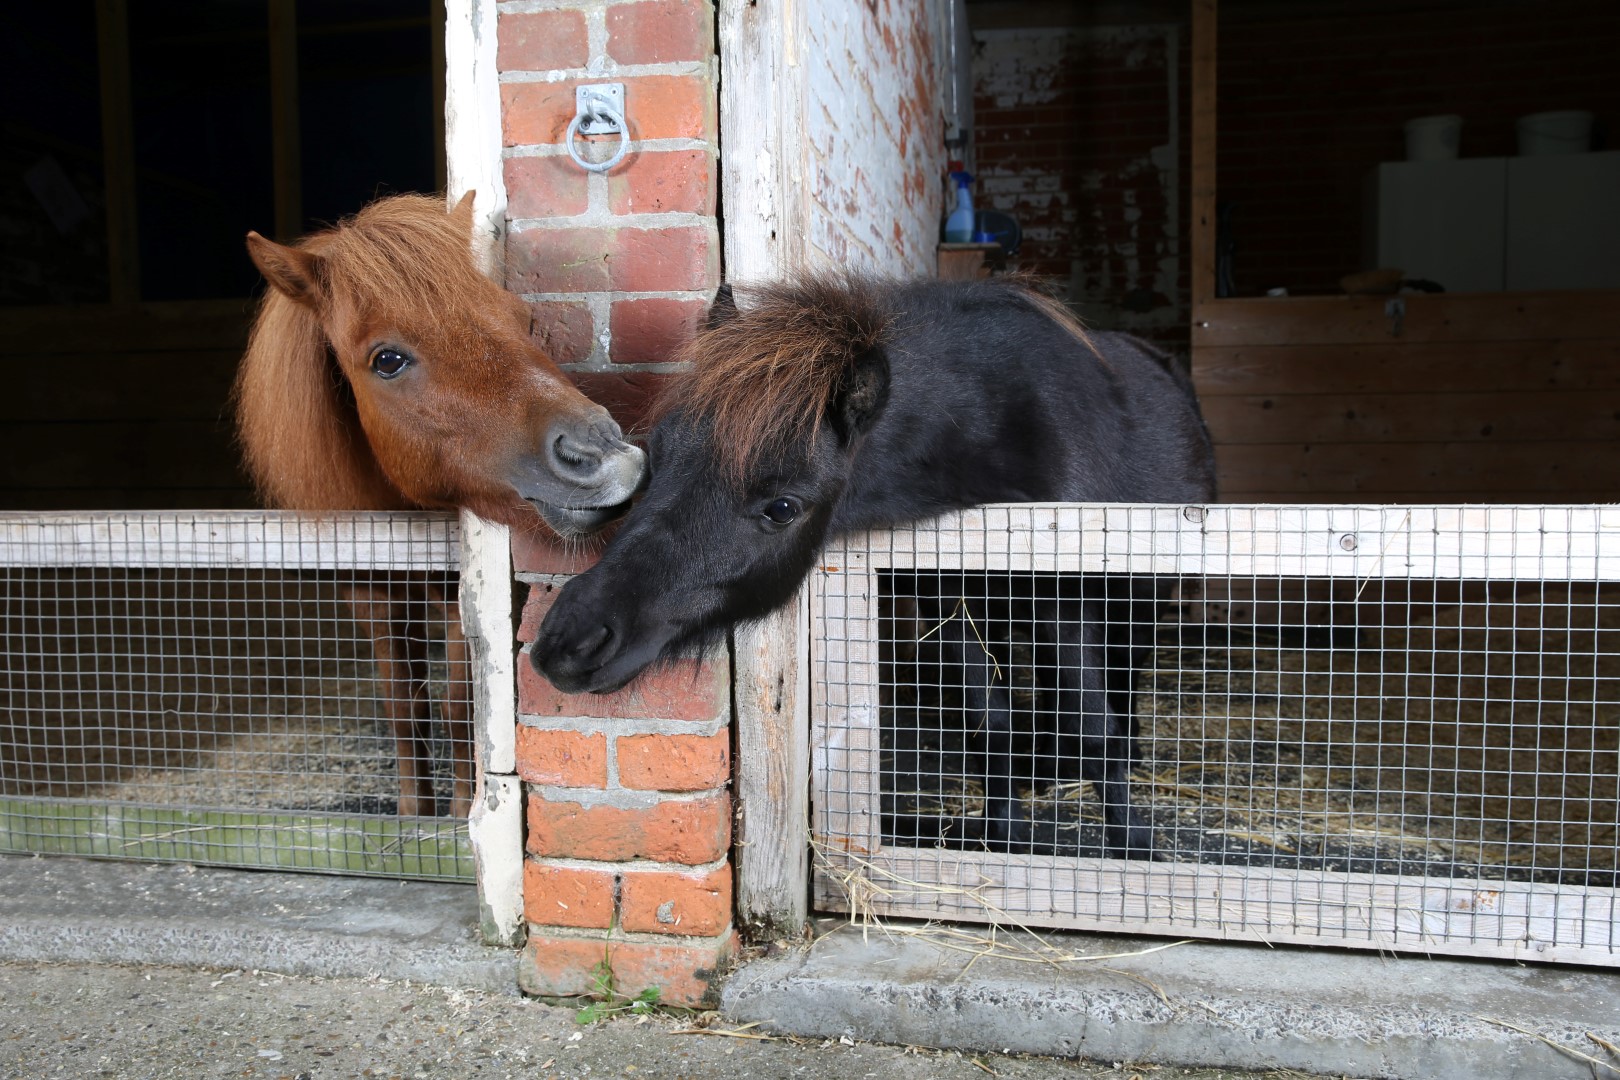 Gary greets pal Zebby in stable next door